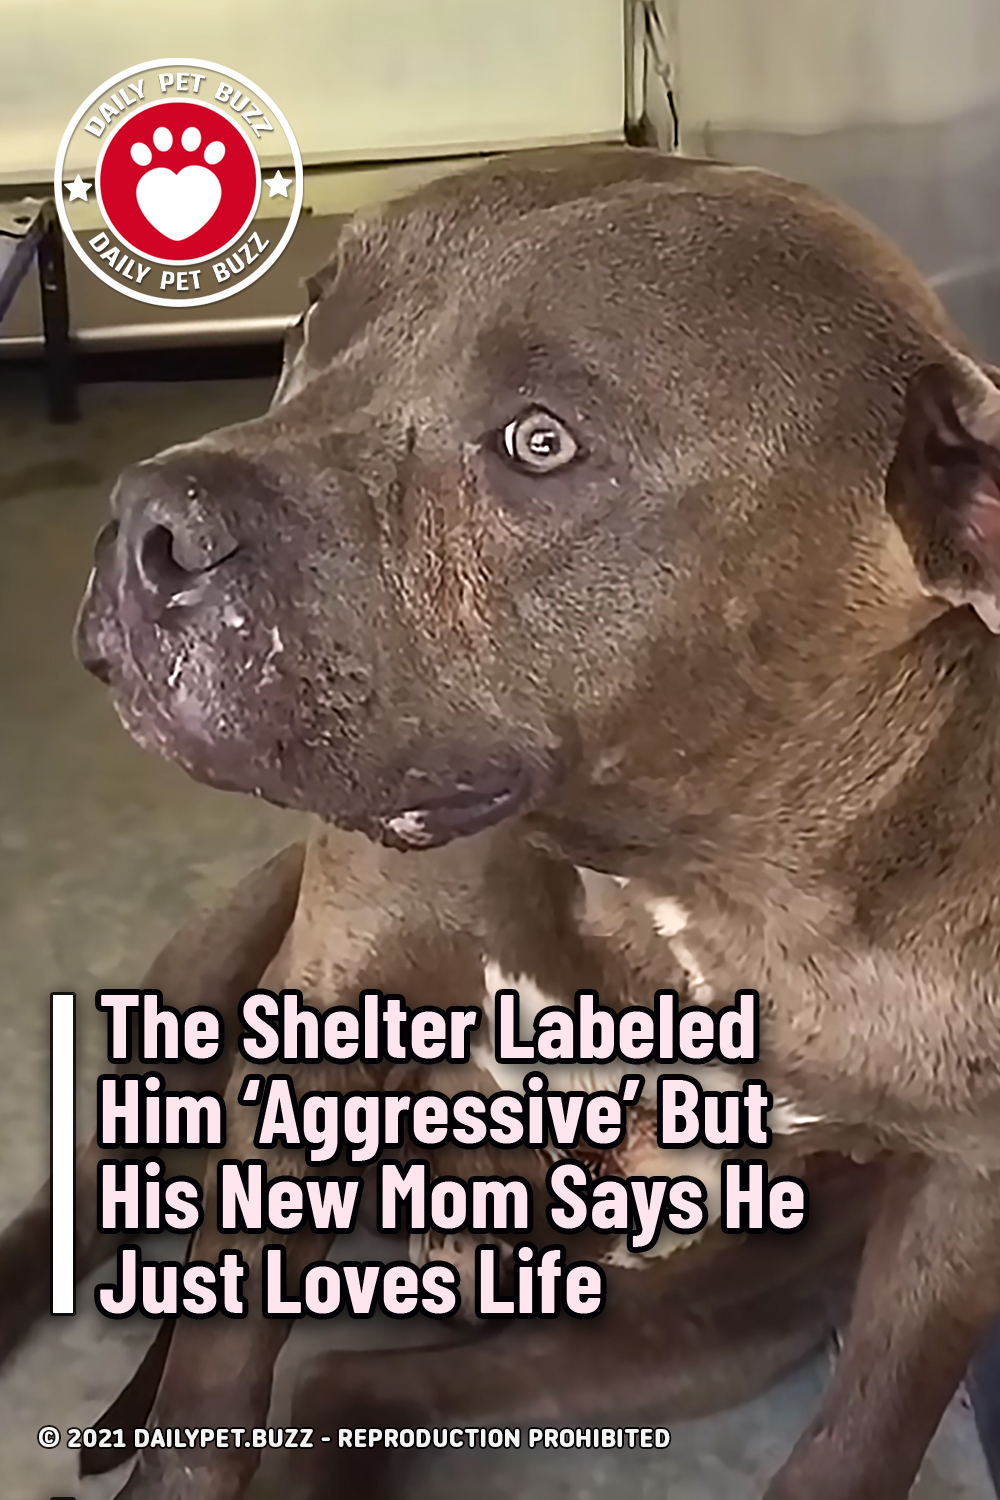 The Shelter Labeled Him \'Aggressive\' But His New Mom Says He Just Loves Life